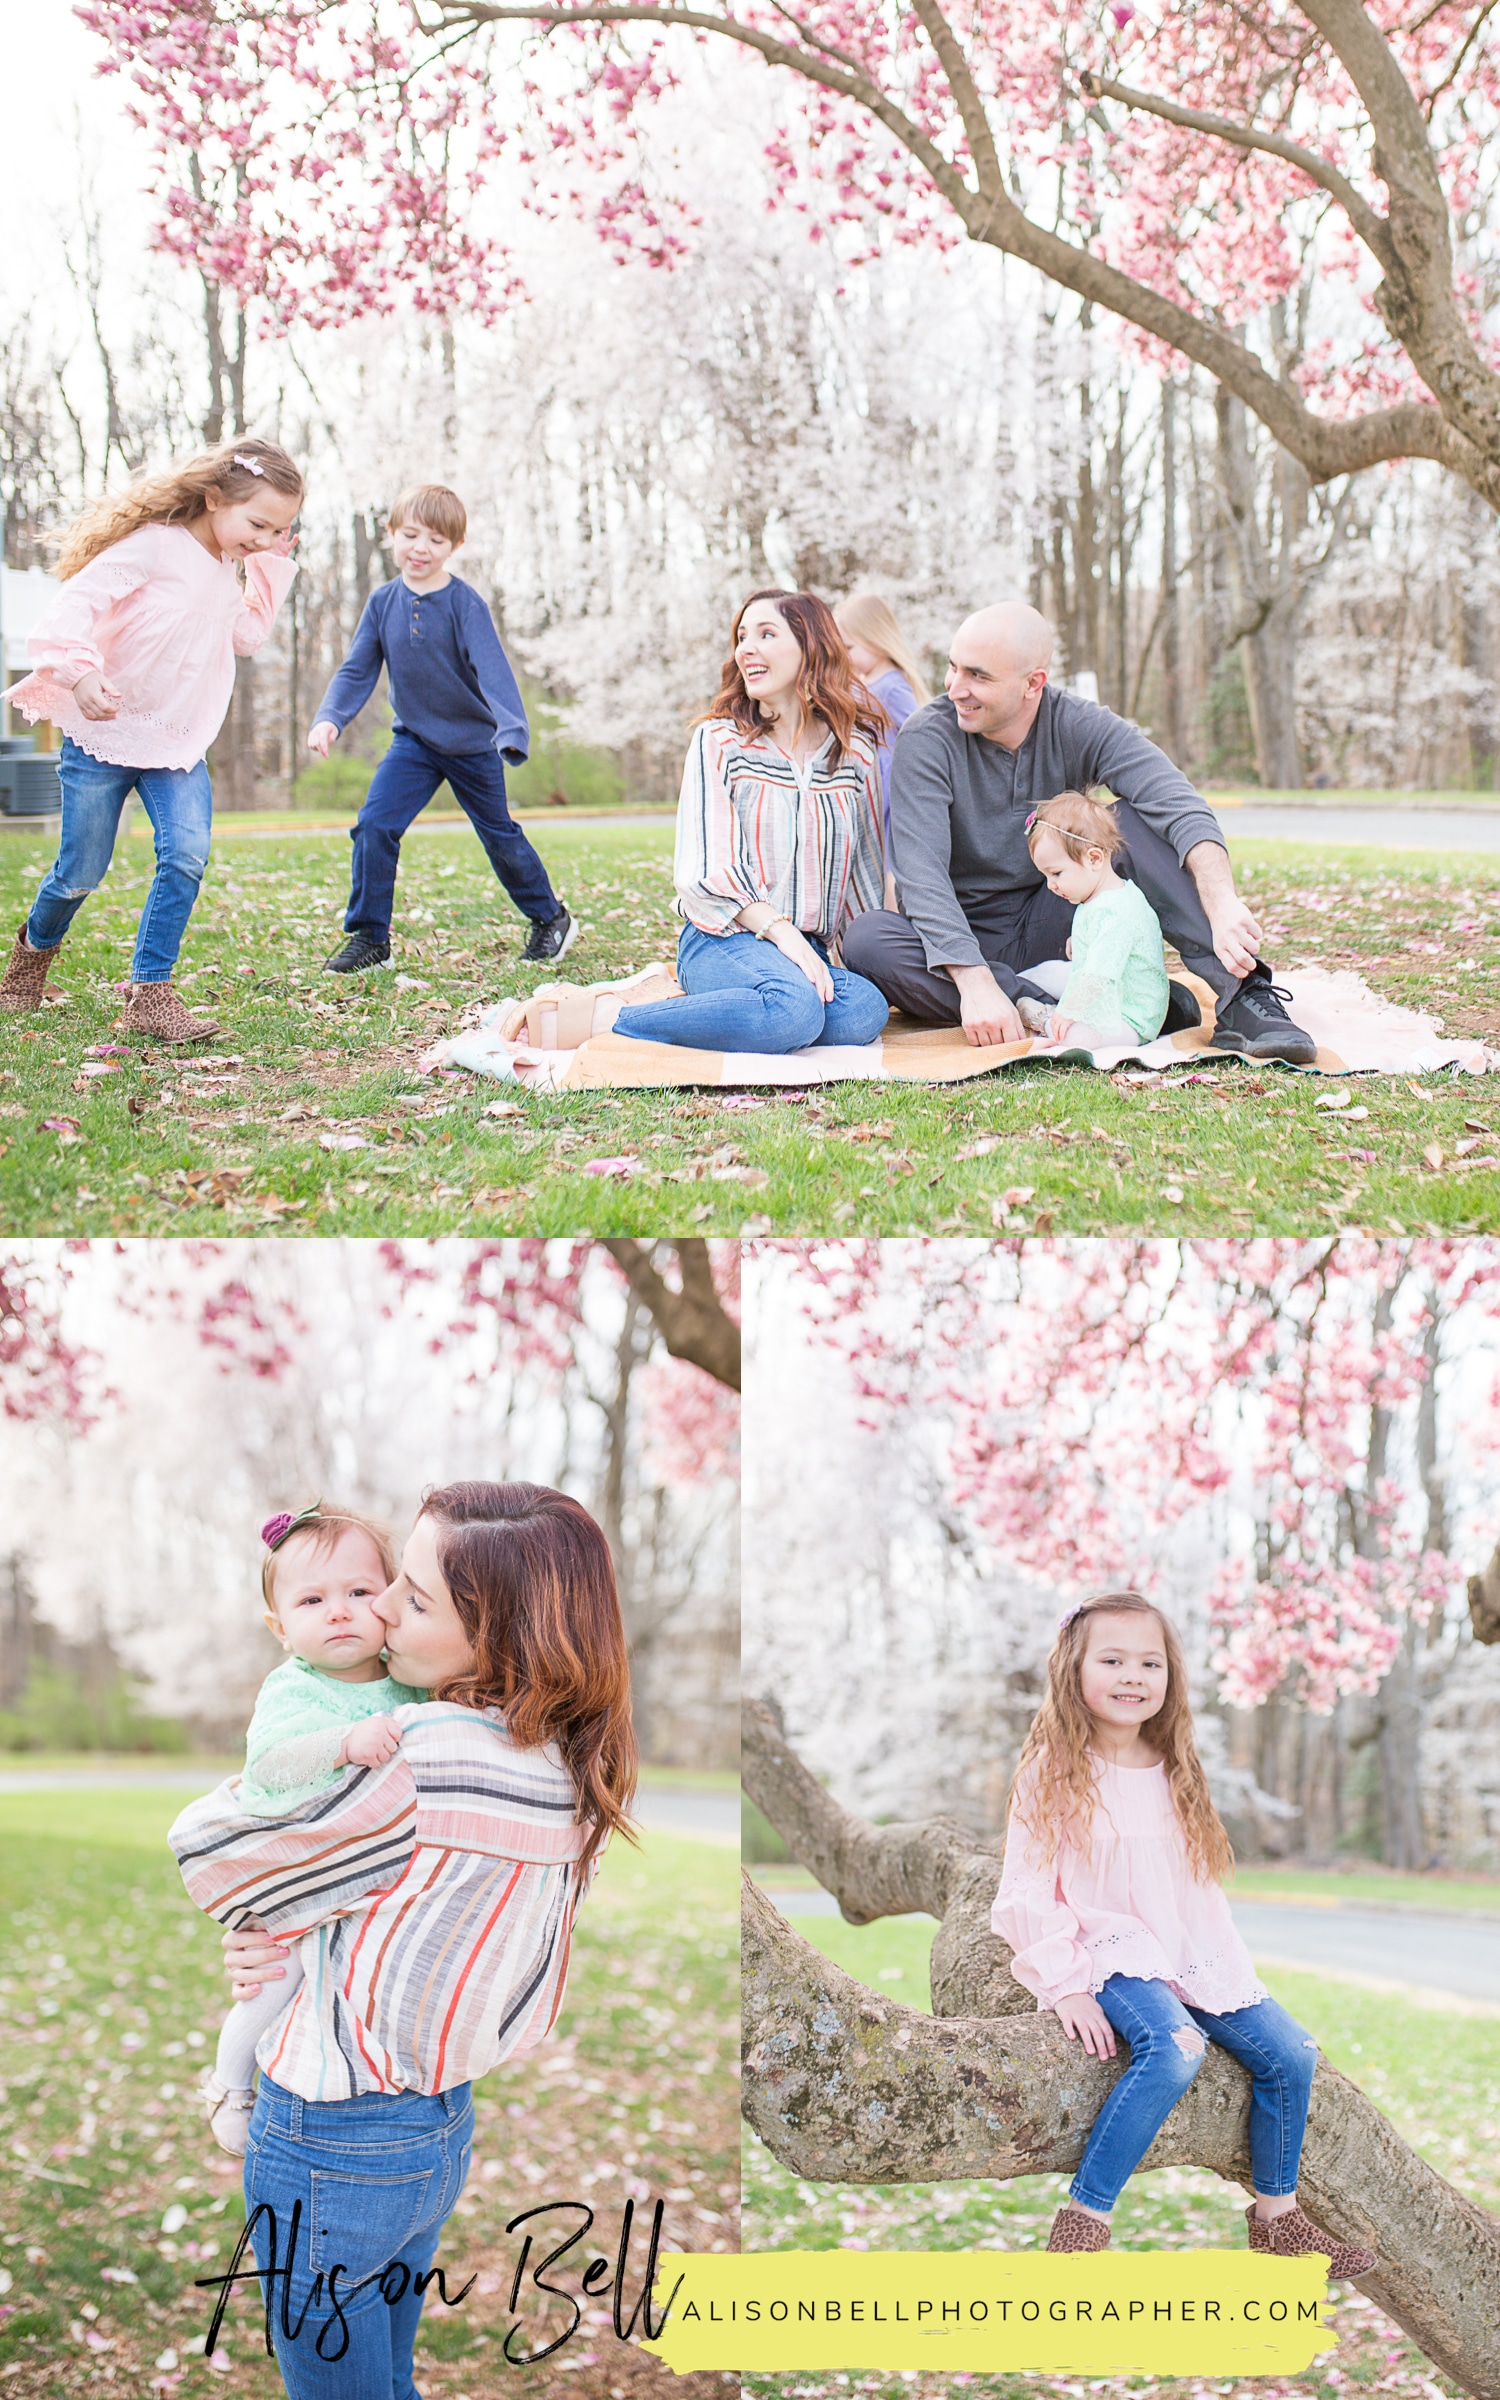 Half Price Family Mini Sessions on Marine Corps Base Quantico with Spring saucer magnolia blossoms by Alison Bell, Photographer. Alisonbellphotographer.com